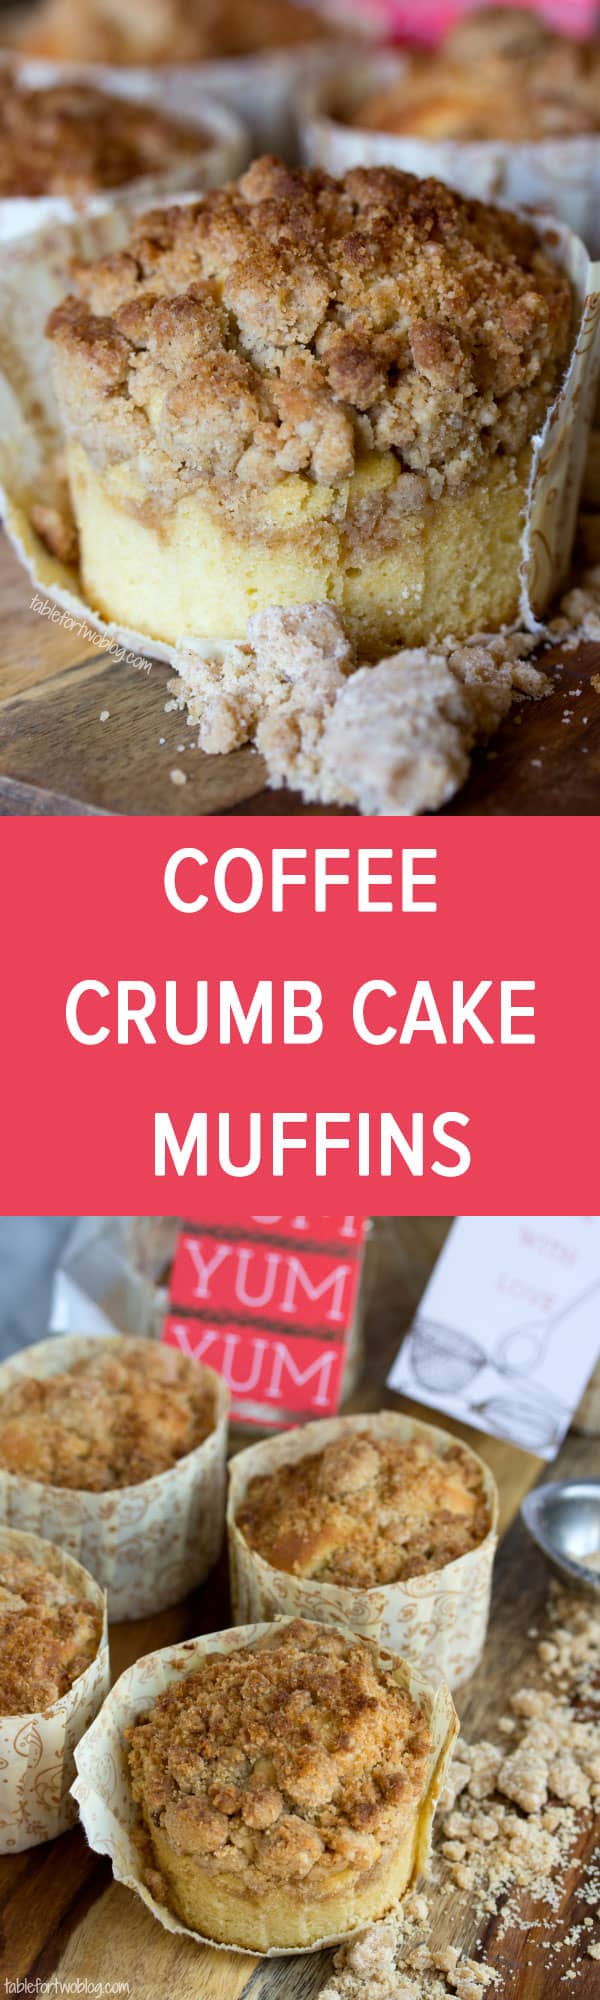 New York-Style Coffee Cake Crumb Muffins from www.tablefortwoblog.com